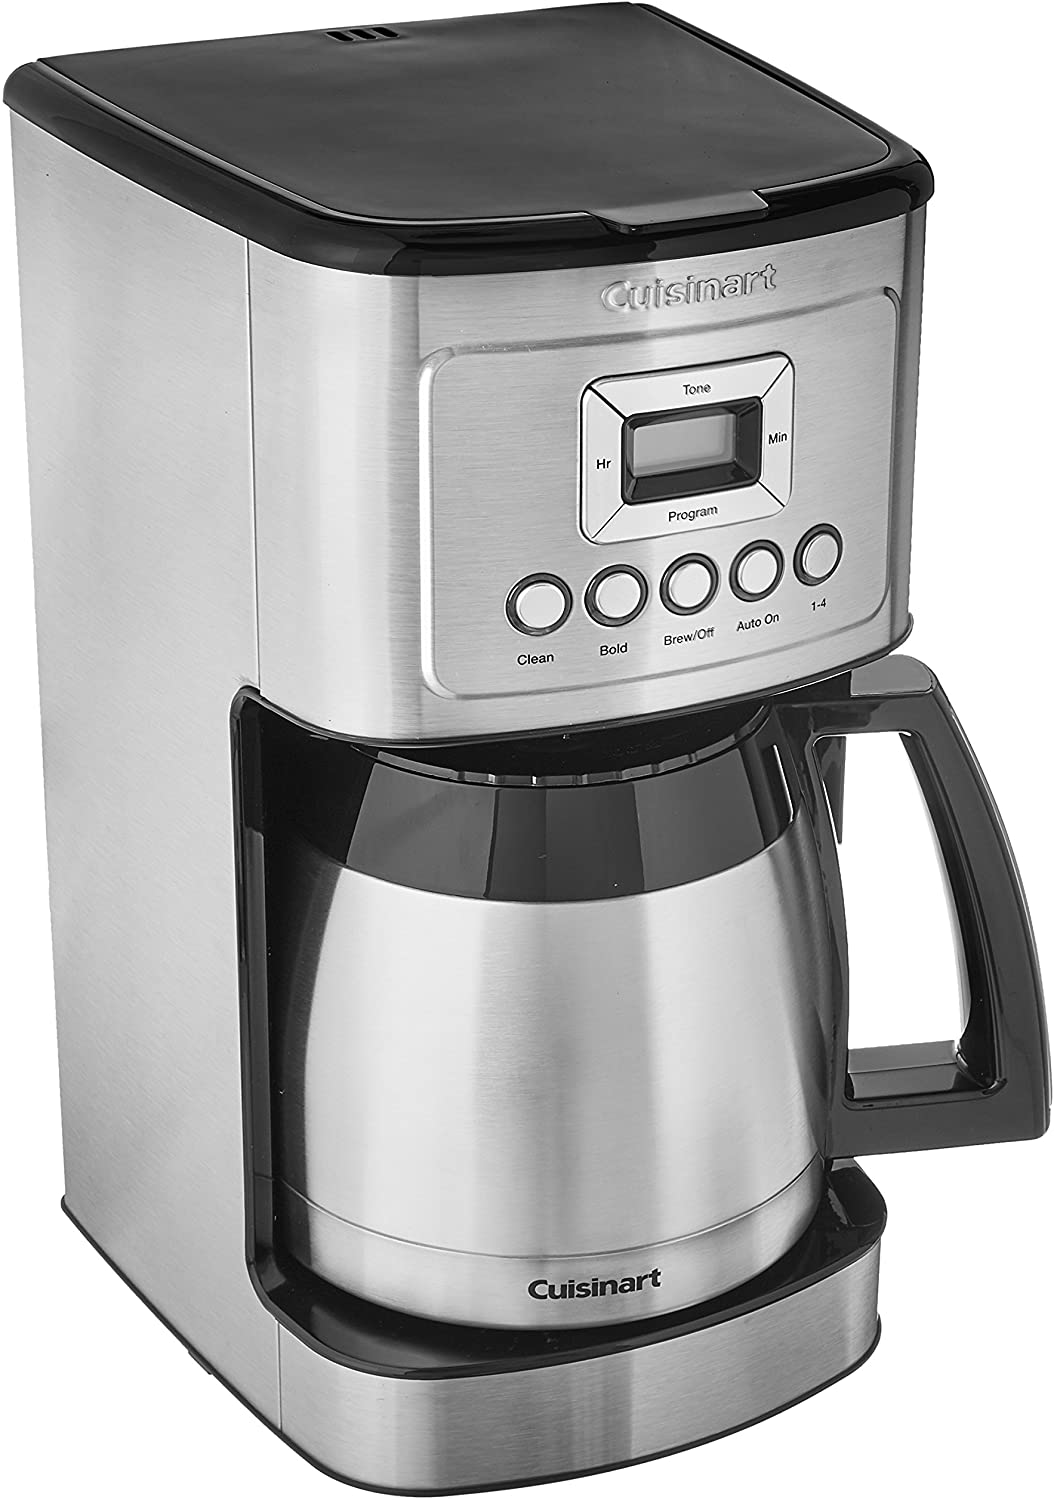 Cuisinart DCC-3400FR 12 Cup Programmable Thermal Coffeemaker, Silver - Certified Refurbished